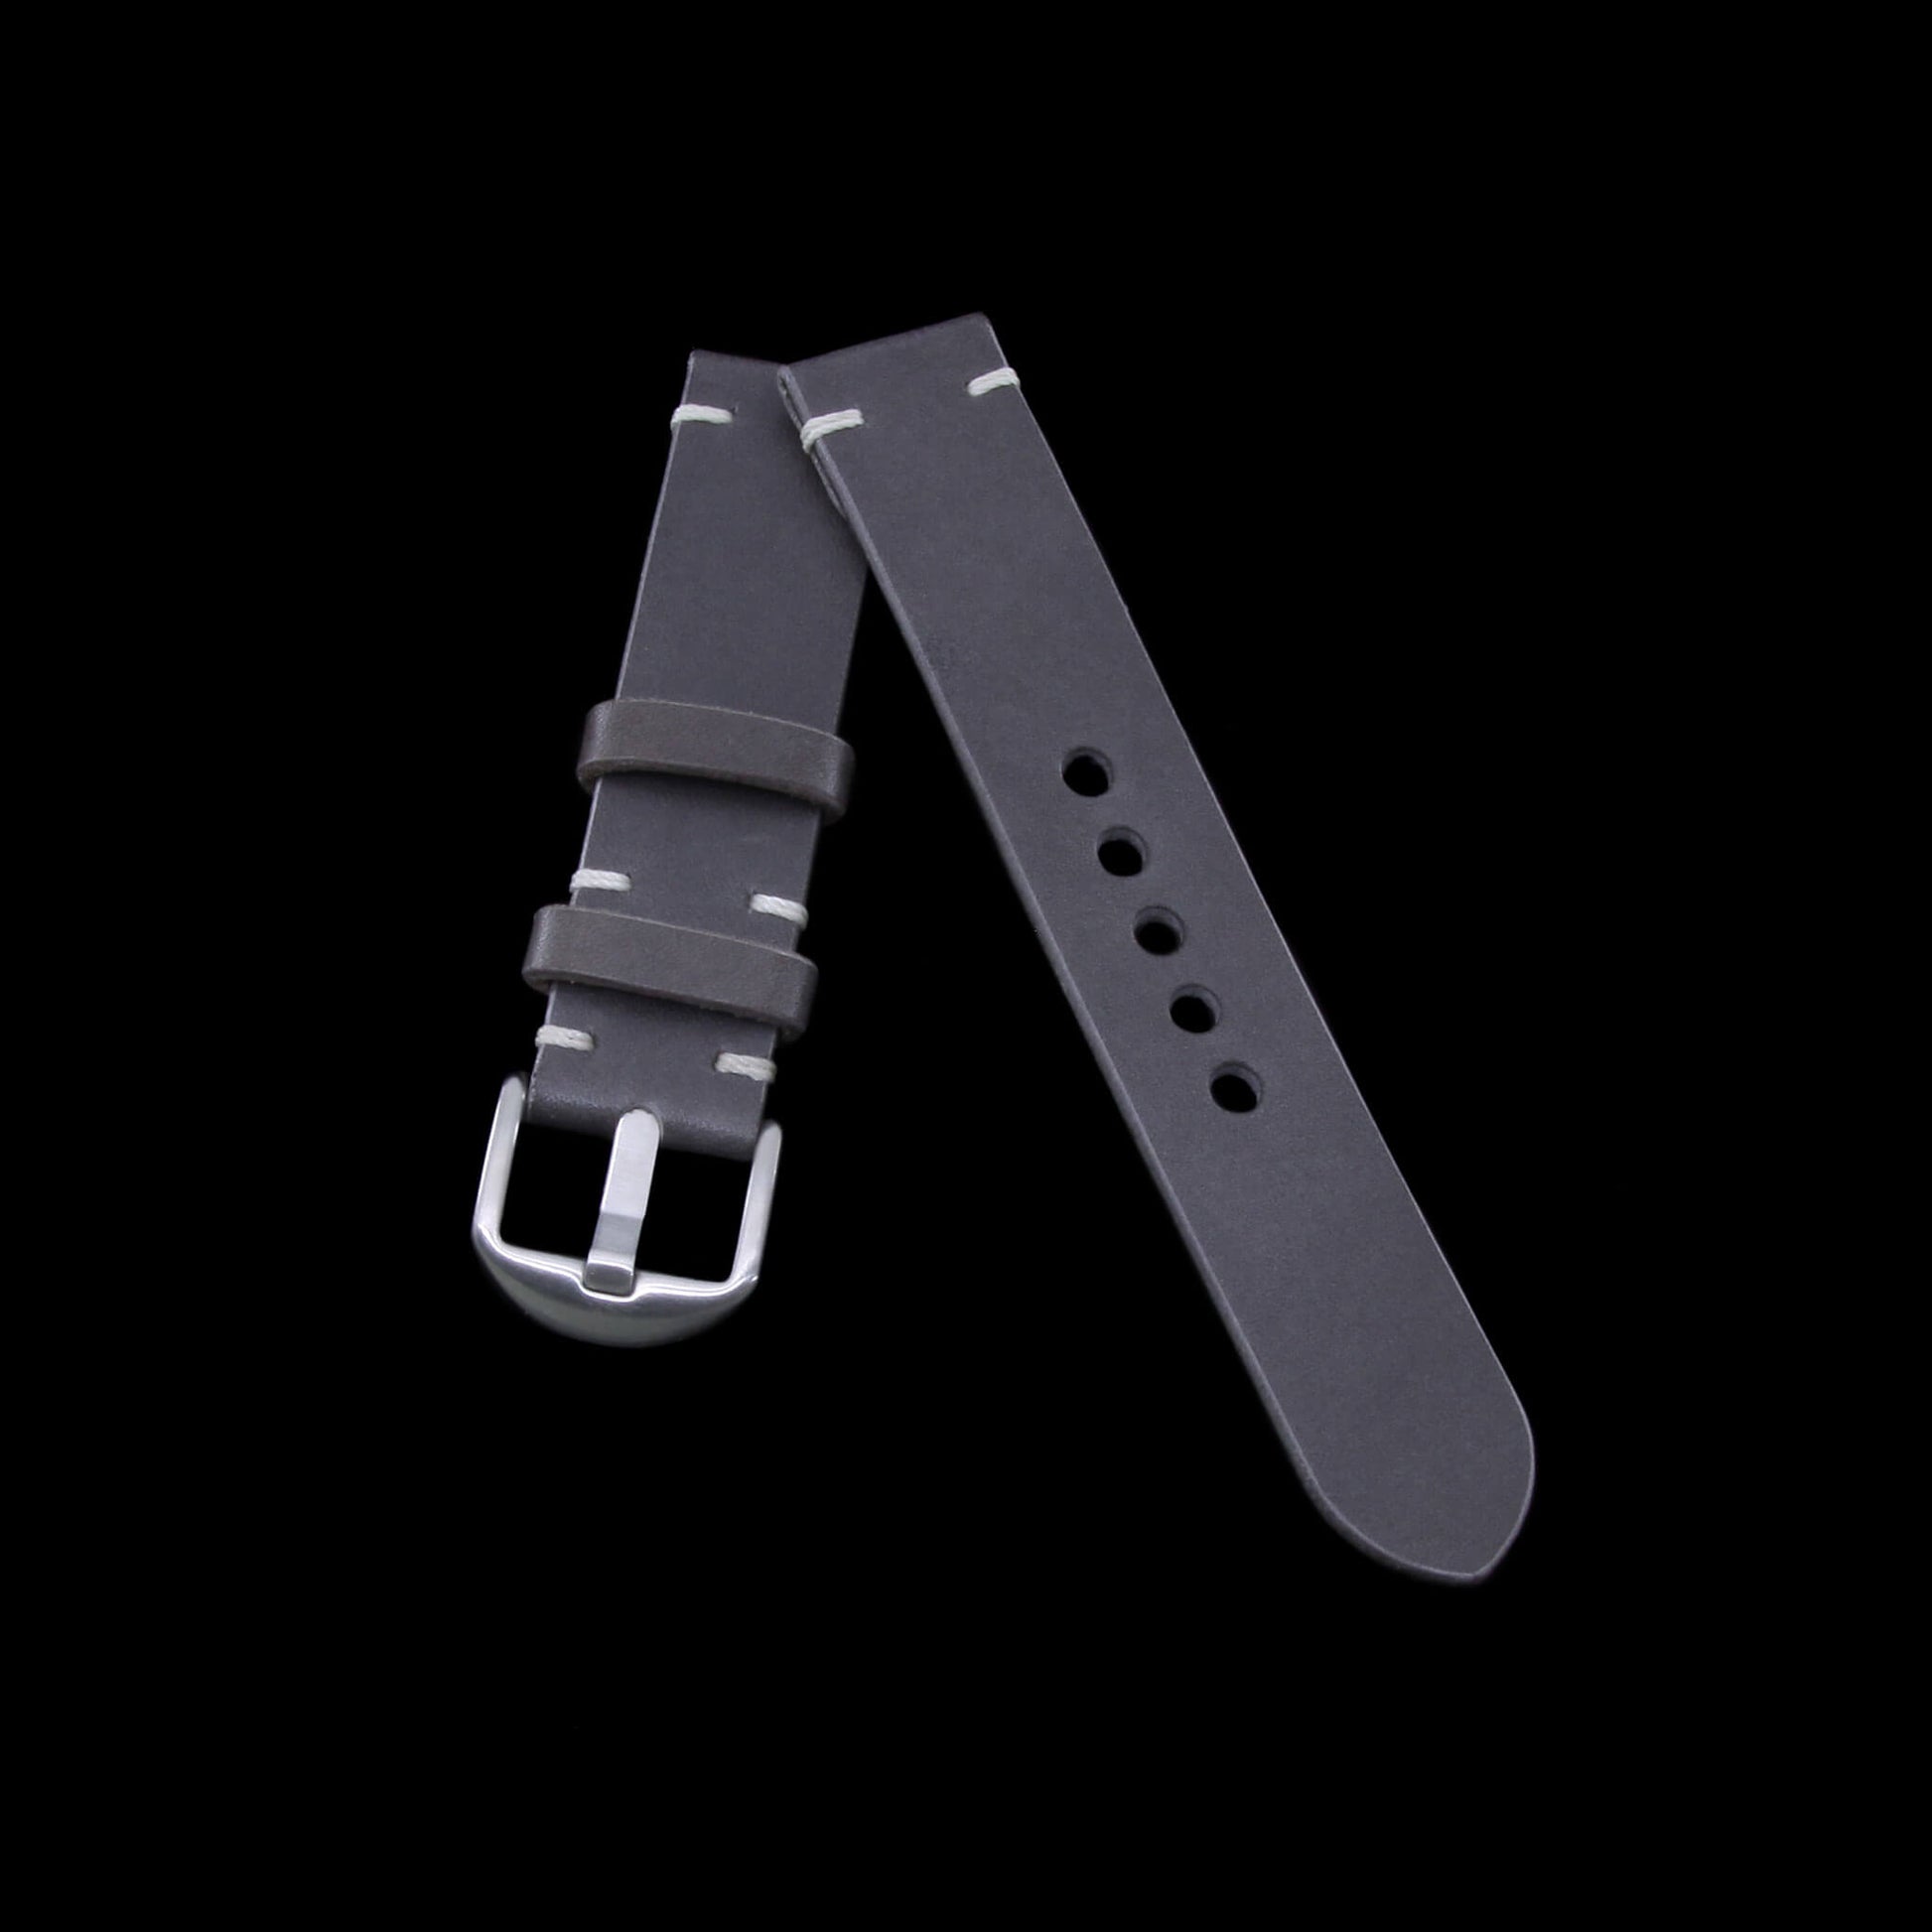 2-Piece Minimalist Leather Watch Strap, made with Koala Antracite Italian veg-tanned leather by Cozy Handmade